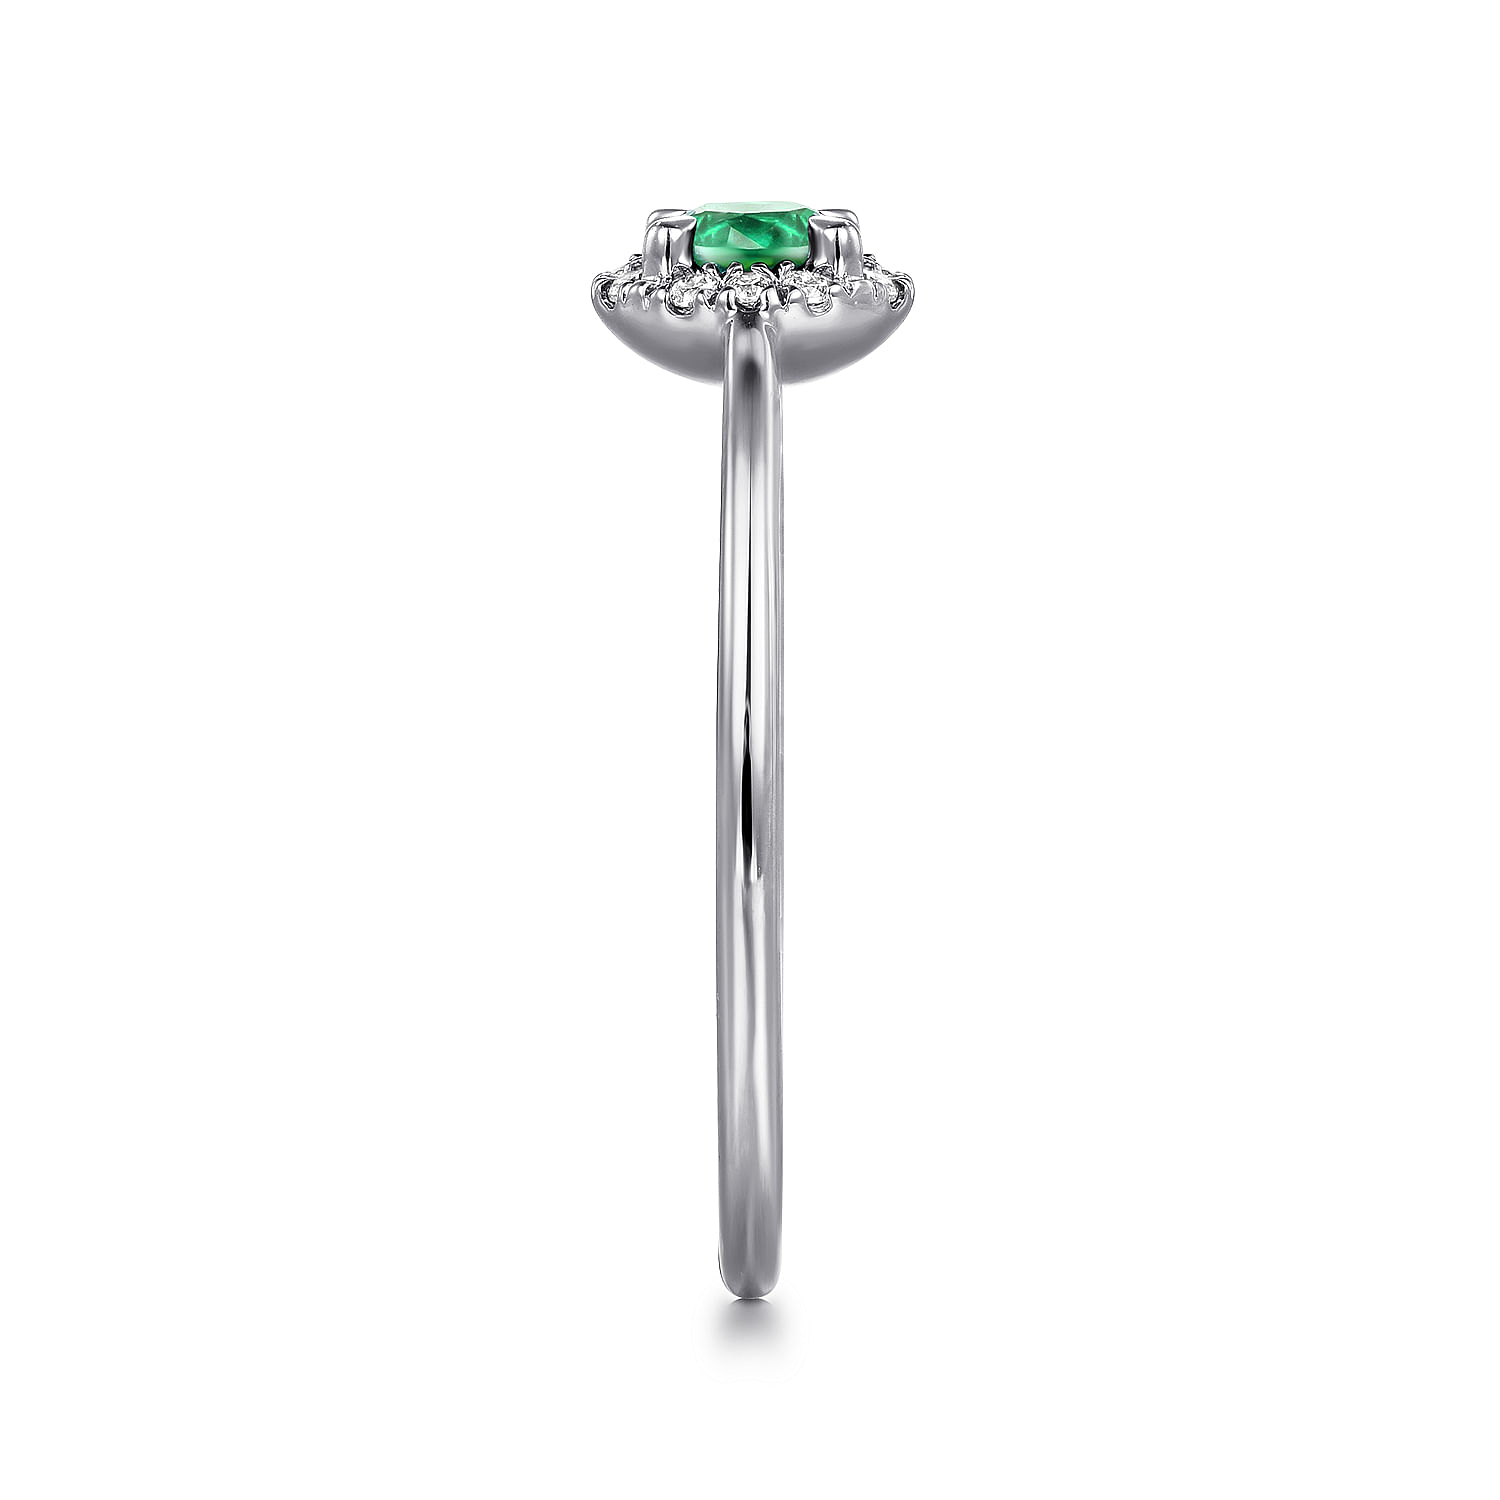 14K White Gold Emerald and Diamond Halo Ring